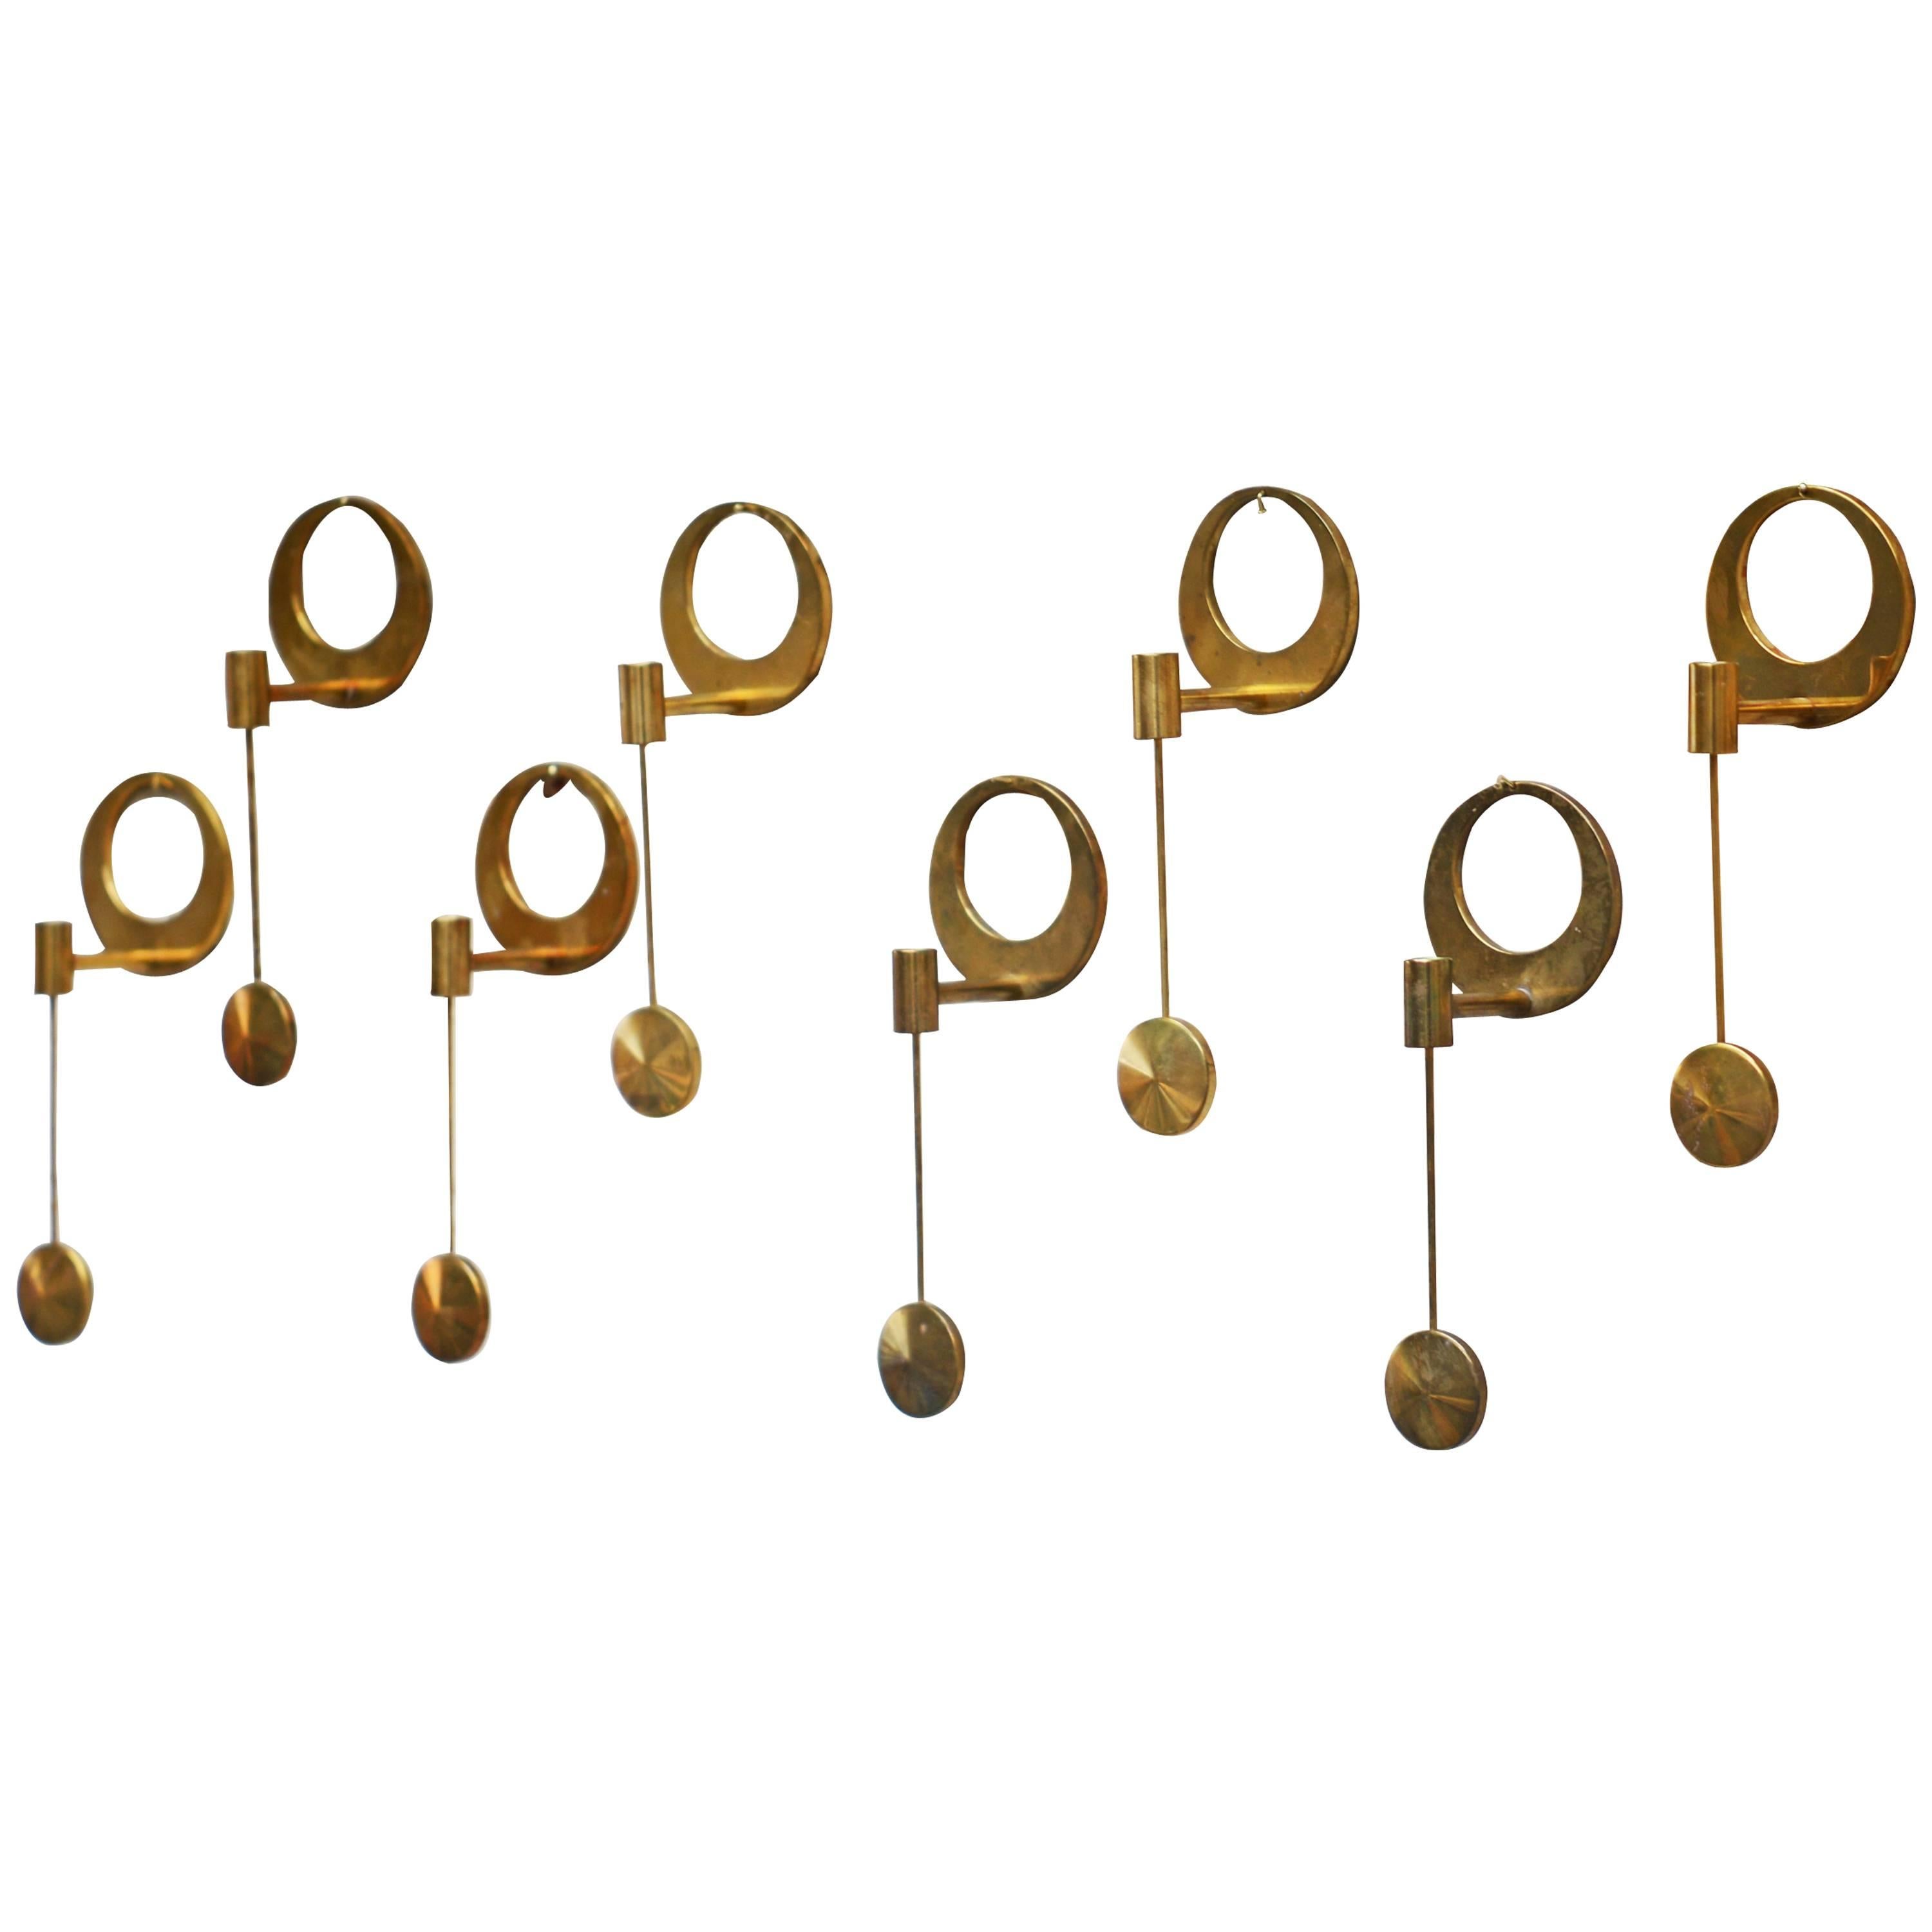 Arthur Pe Eight Round Brass Wall Candlesticks Made by Hand by the Artist, Sweden For Sale